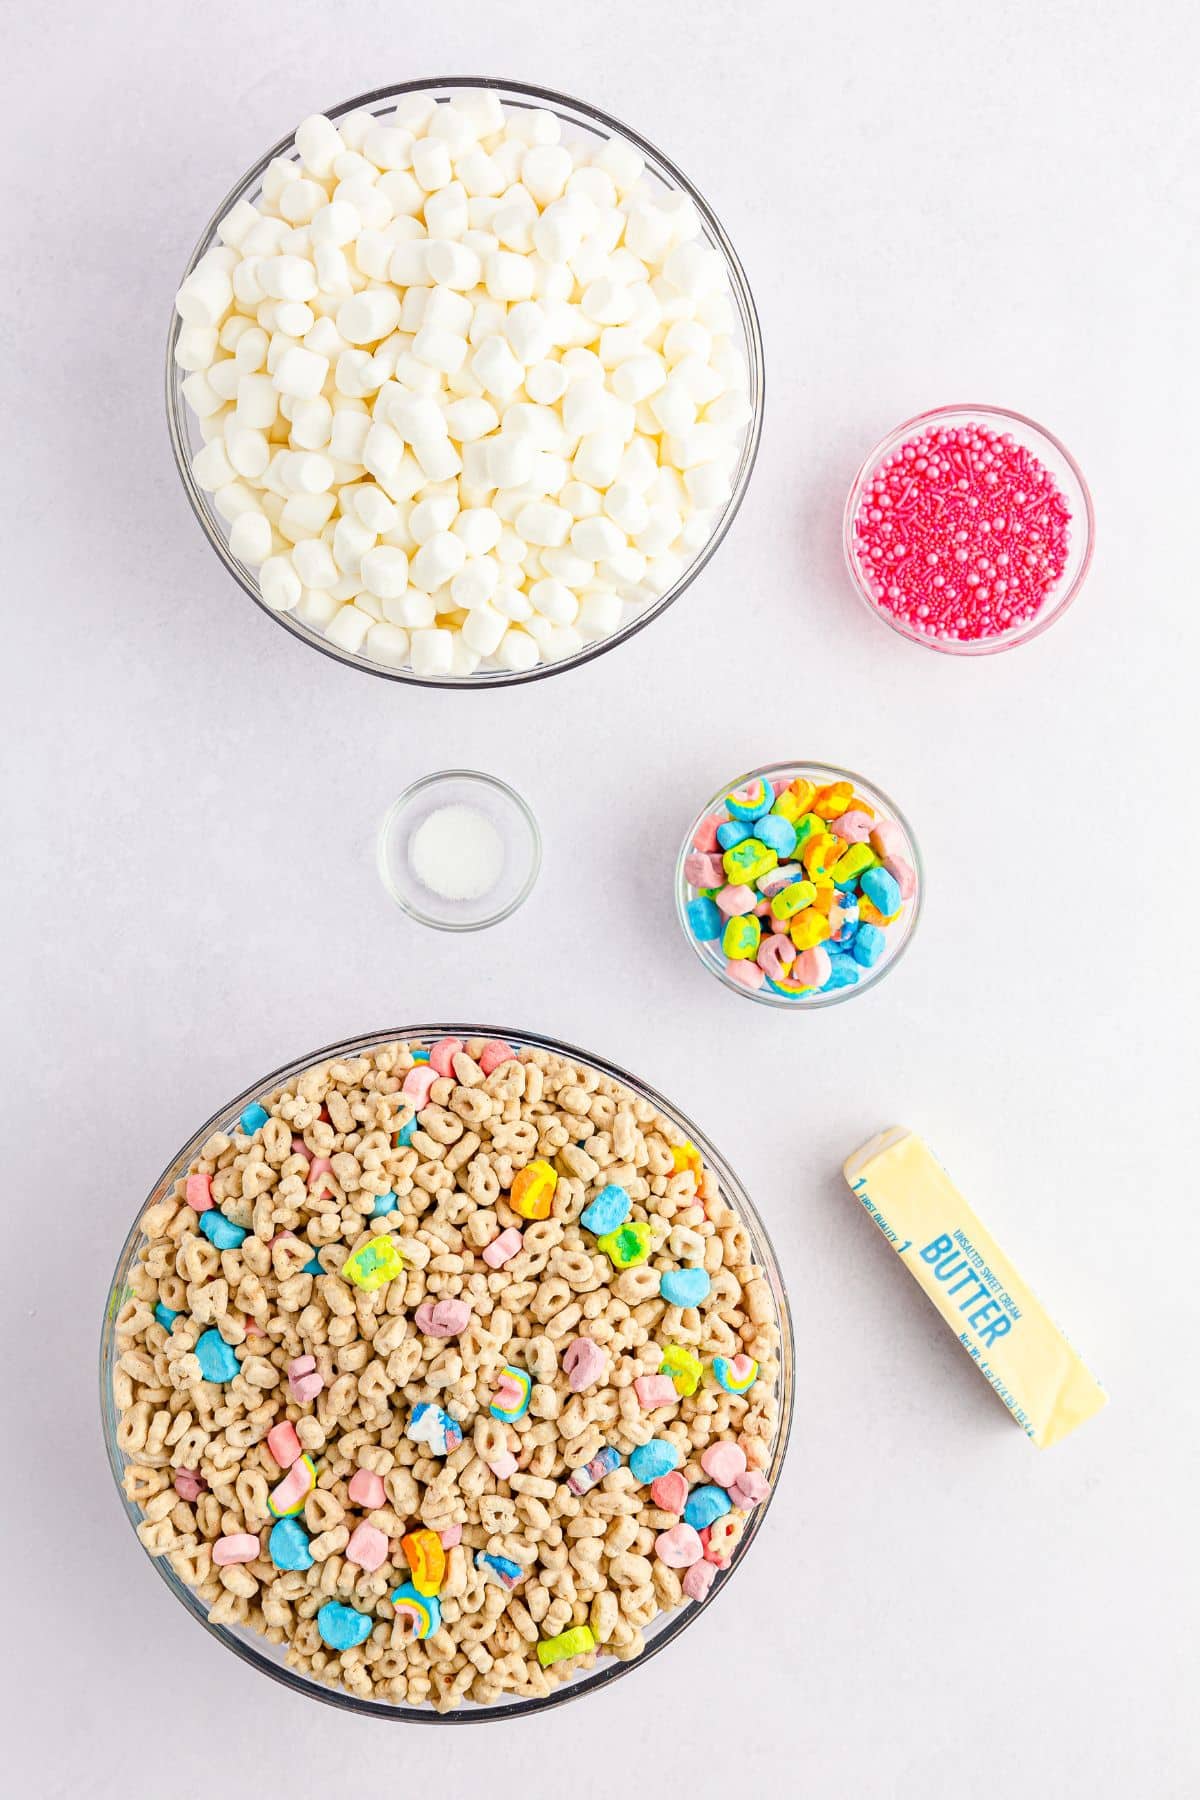 mini marshmallows, Lucky Charms cereal, a stick of butter, and sprinkles on counter